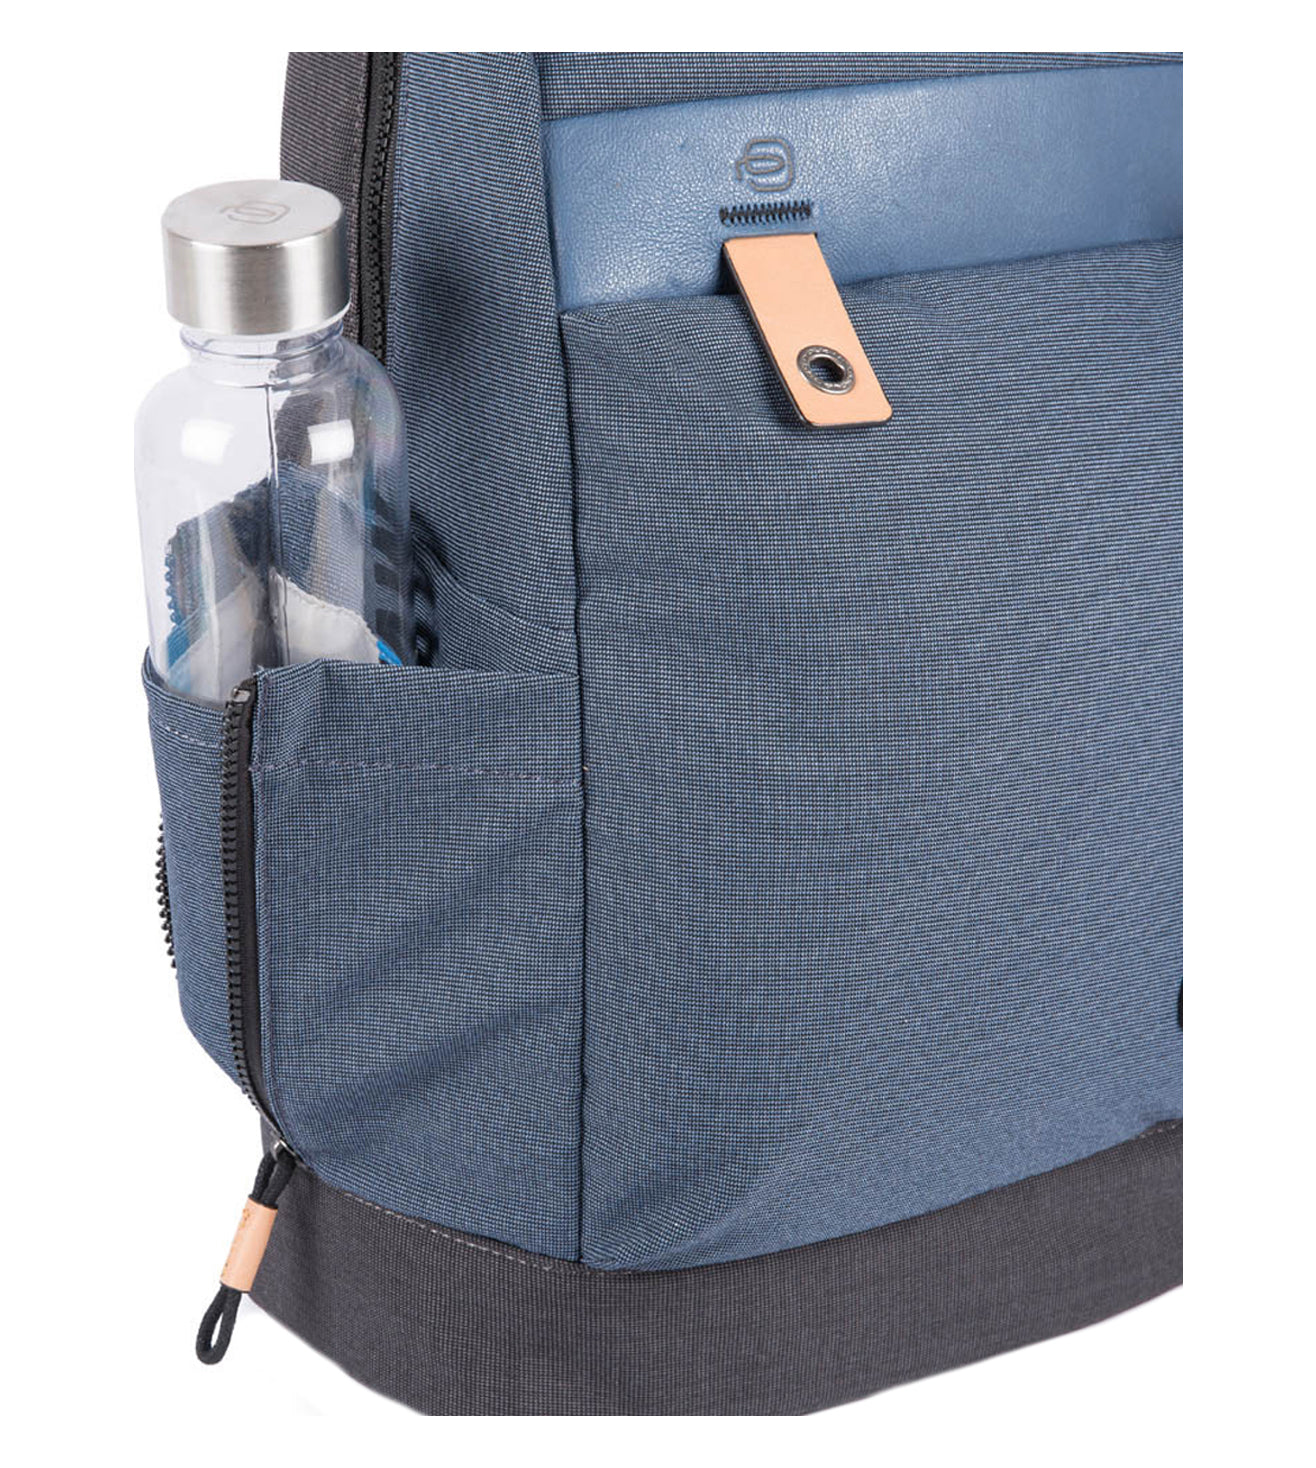 Piquadro Blade Unisex R.A.F. Blue Backpack